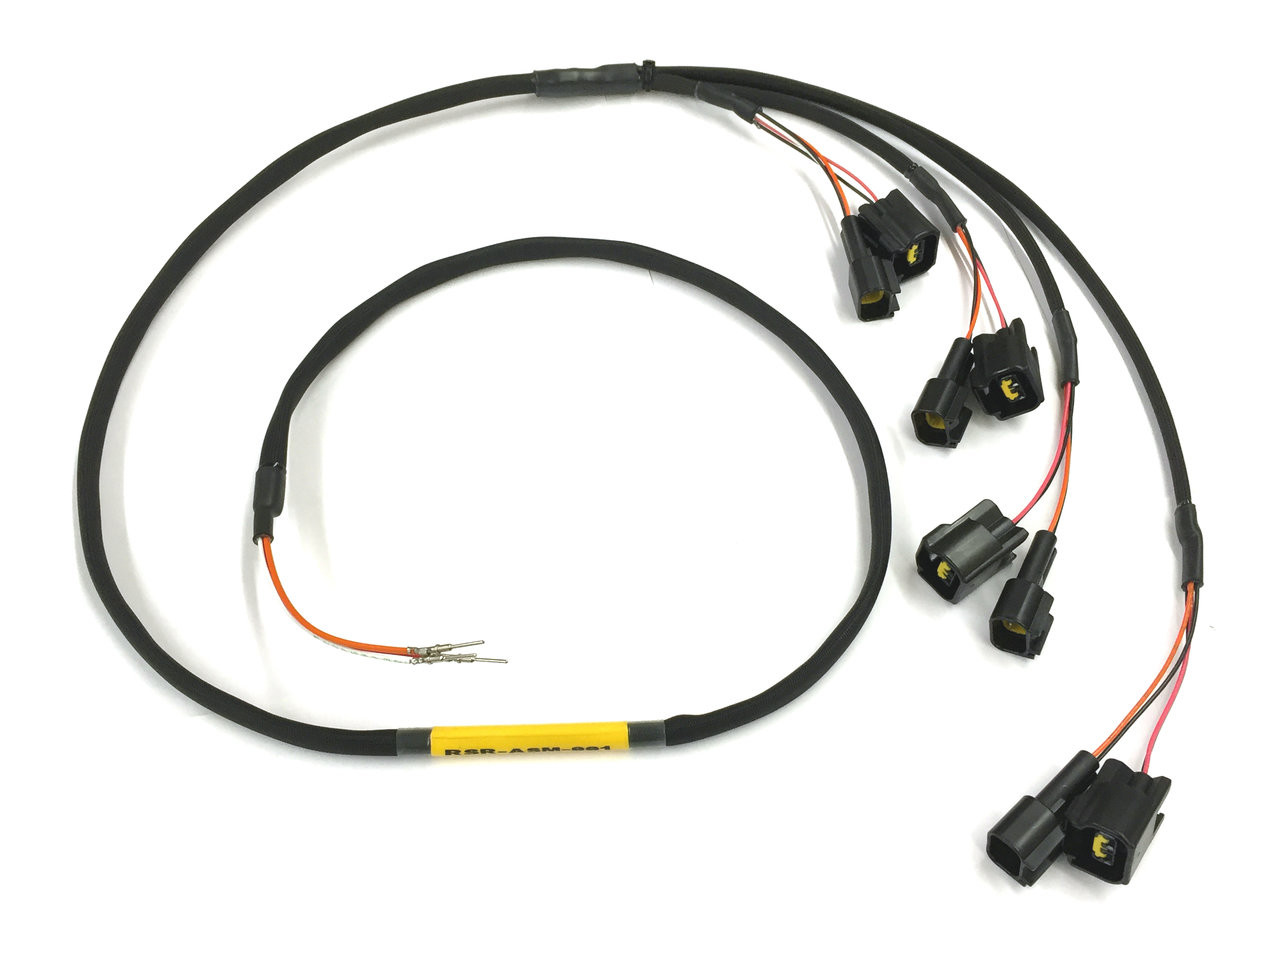 RSR ASM Ignition Coil Kill Wiring Harness